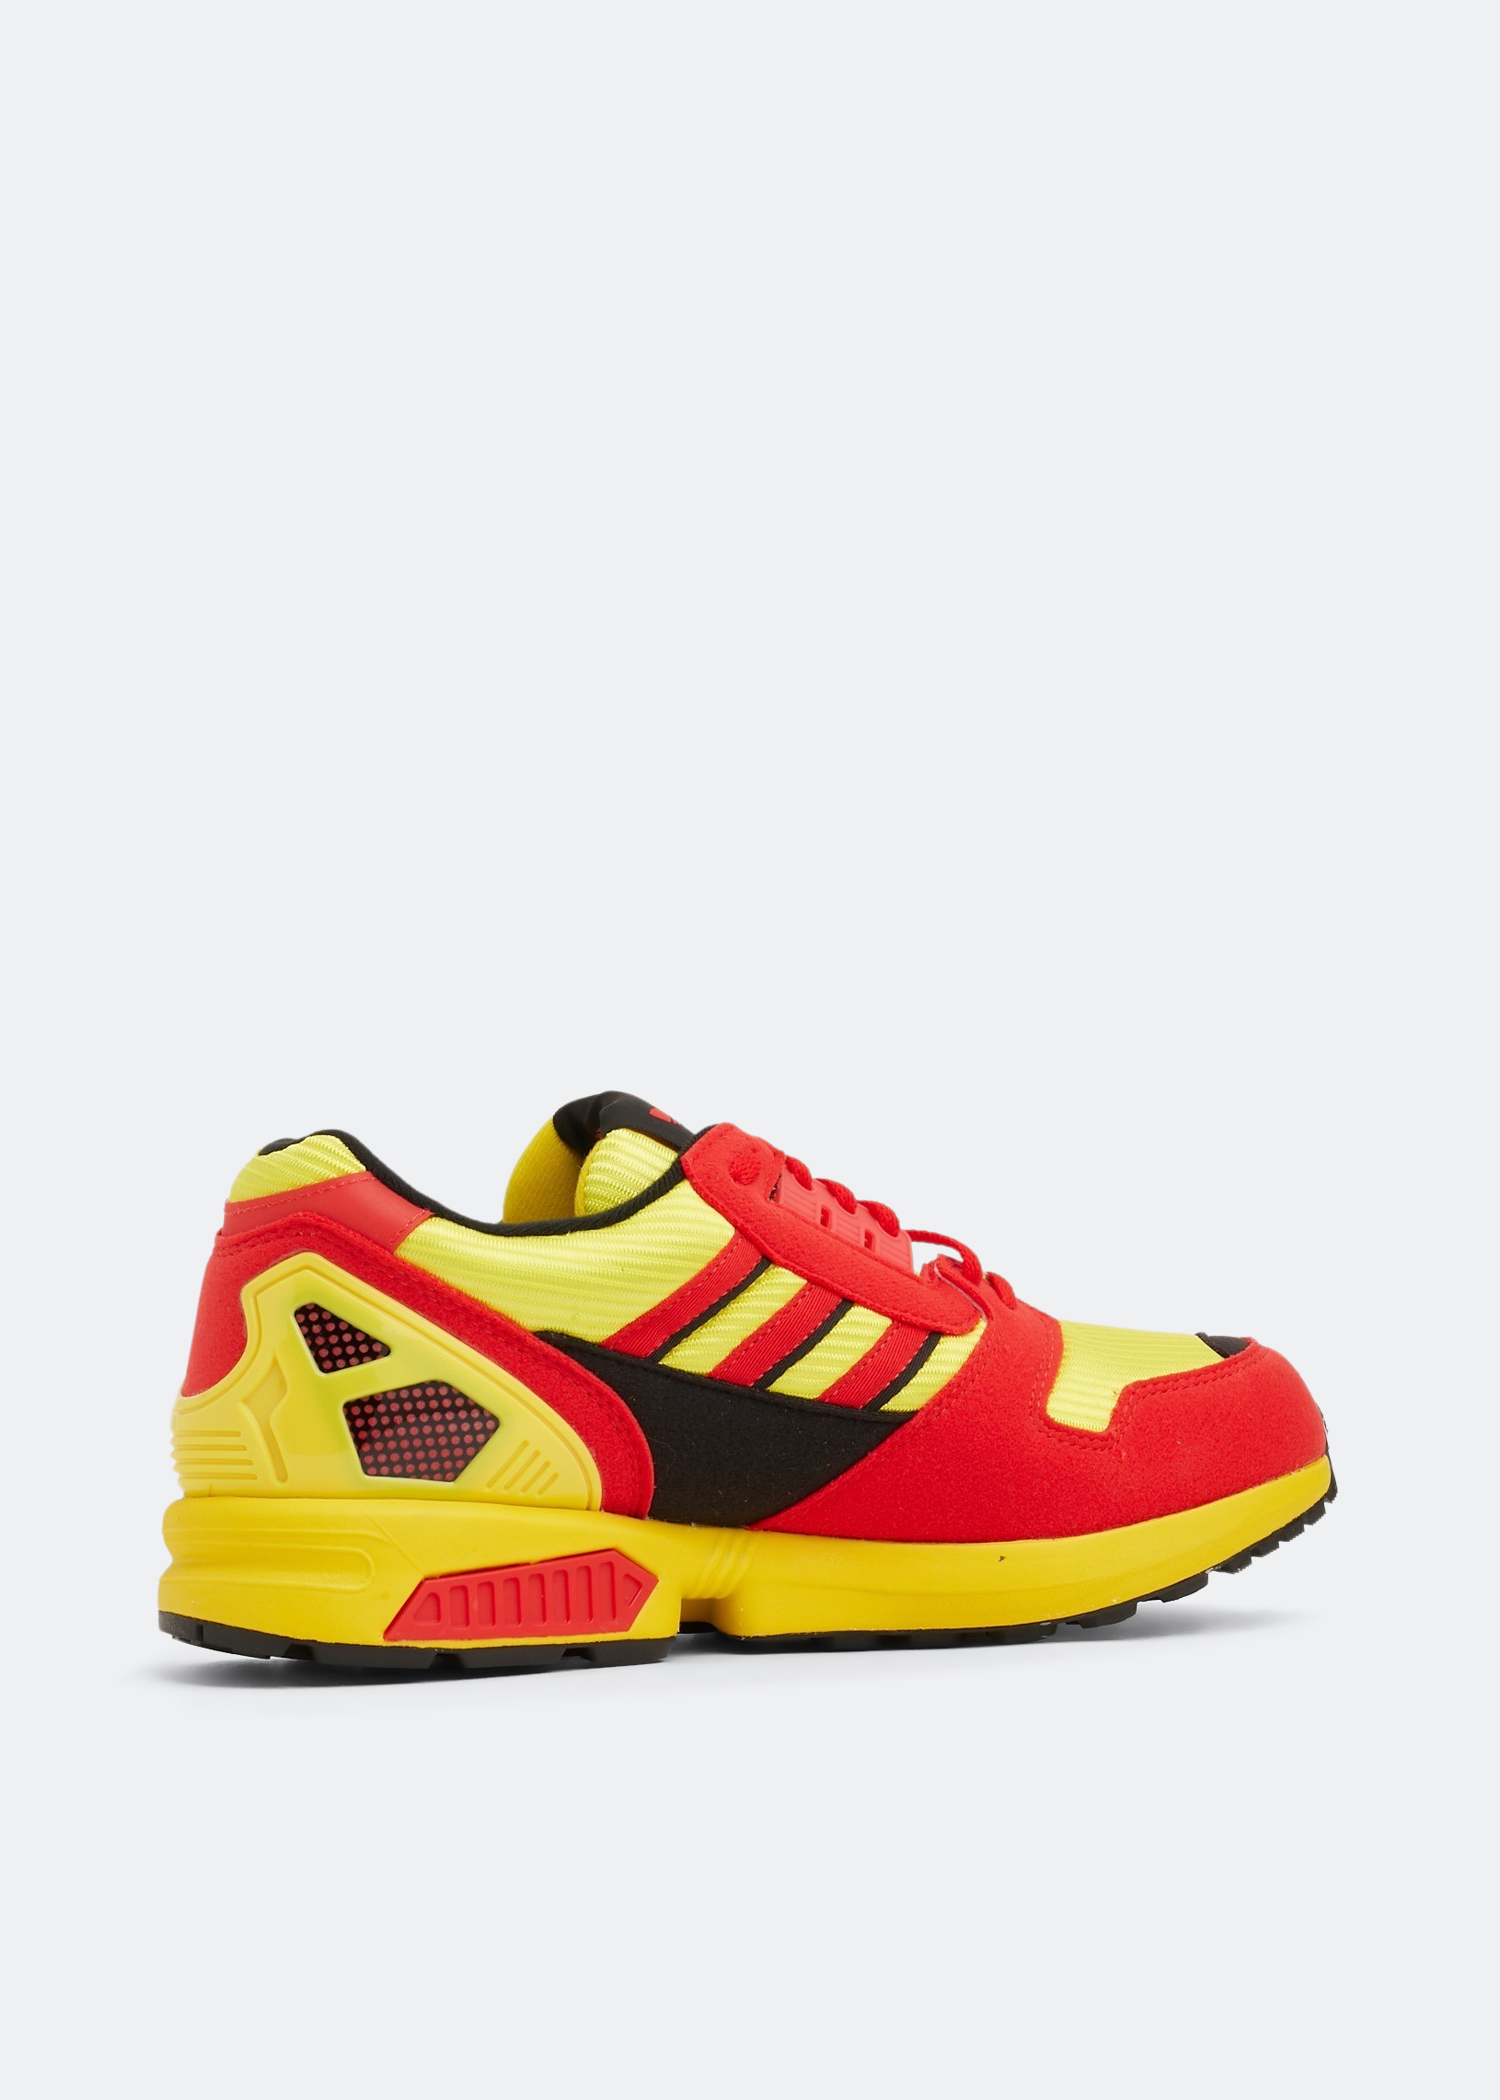 Adidas ZX 8000 sneakers for Men - Yellow in KSA | Level Shoes